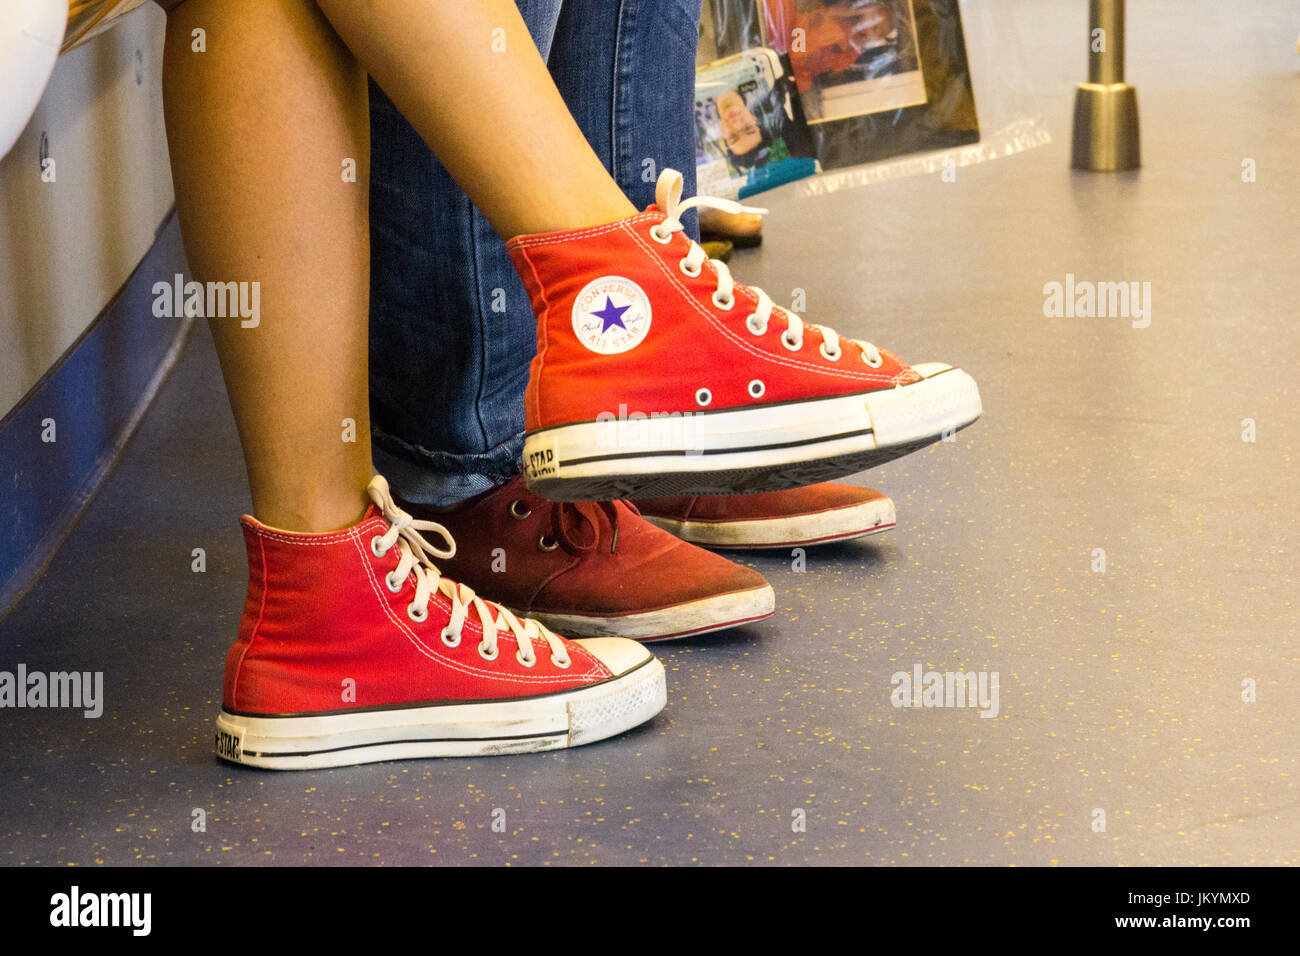 Young Girl wearing paire de chaussures Converse All Star Banque D'Images